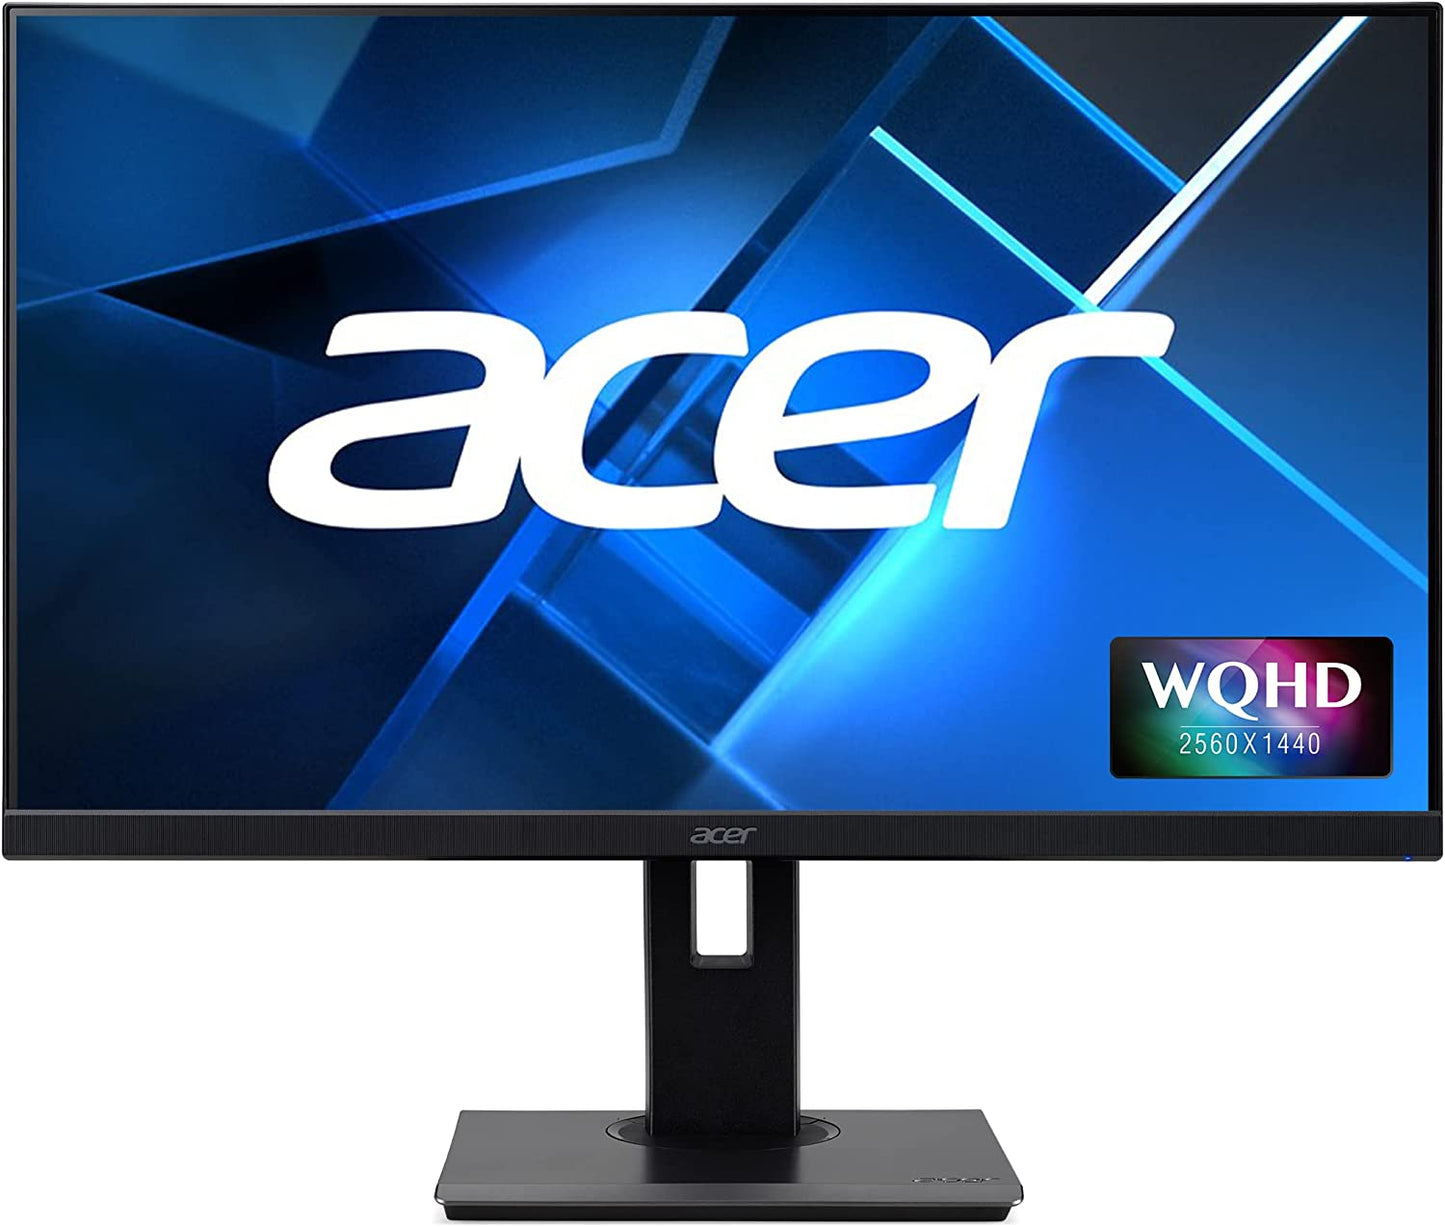 Acer B277U bmiipprzx 27" WQHD 2560 x 1440 IPS Monitor with Adaptive-Sync | 75Hz Refresh Rate | 4ms (G to G) | 100% sRGB | Display Port, Mini Display Port, 2 x HDMI 2.0, USB and Audio-Out Ports - Dealtargets.com